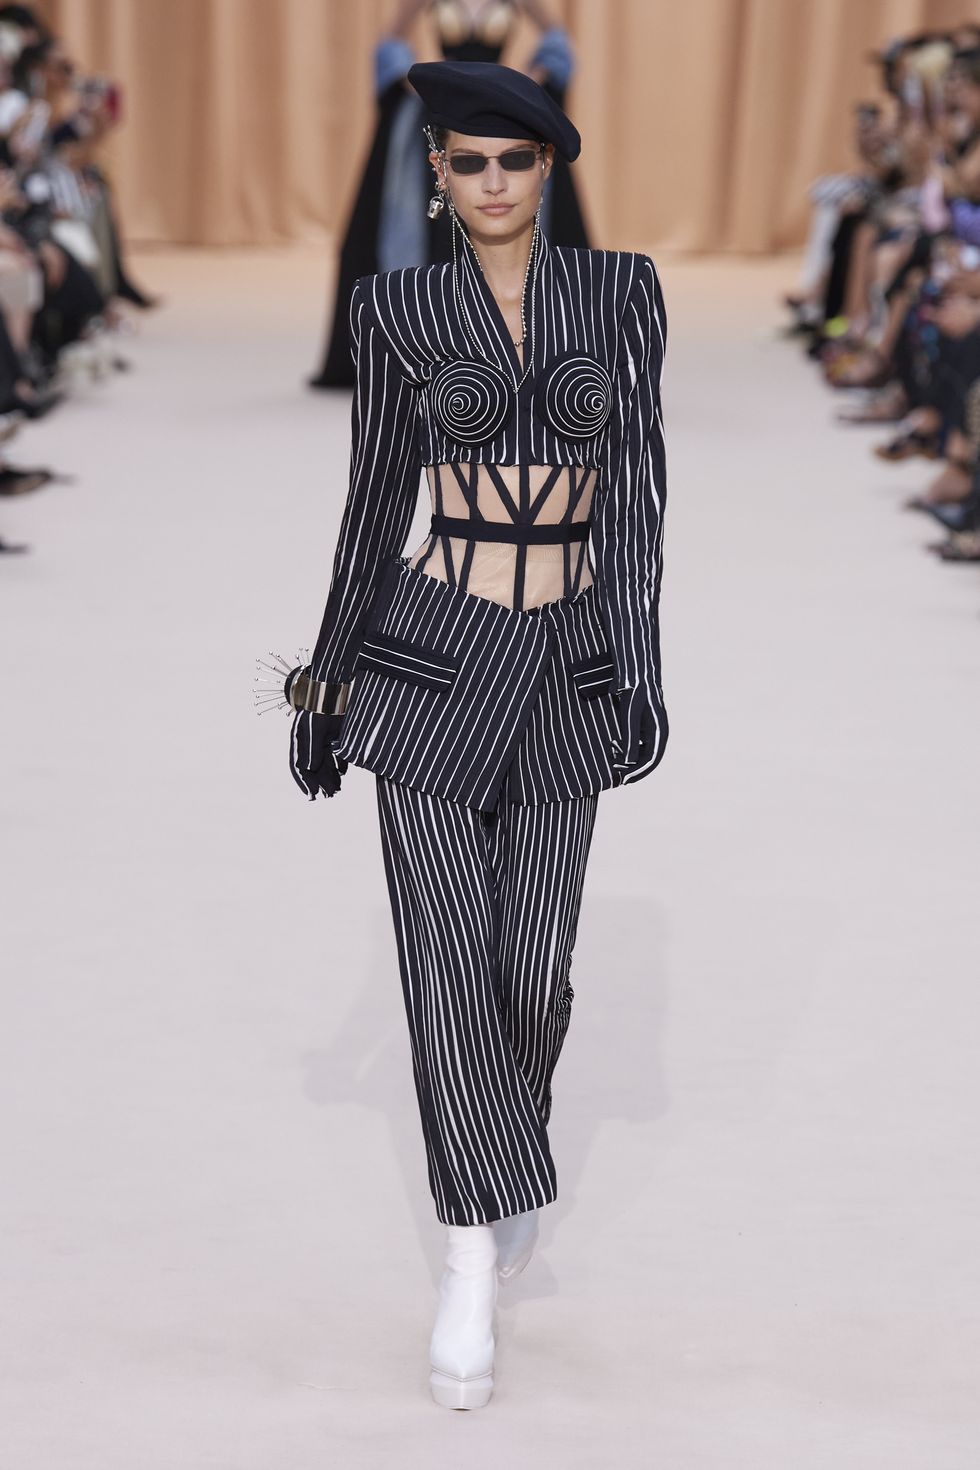 Olivier Rousteing Sketched 200 Looks for Jean Paul Gaultier Couture – WWD